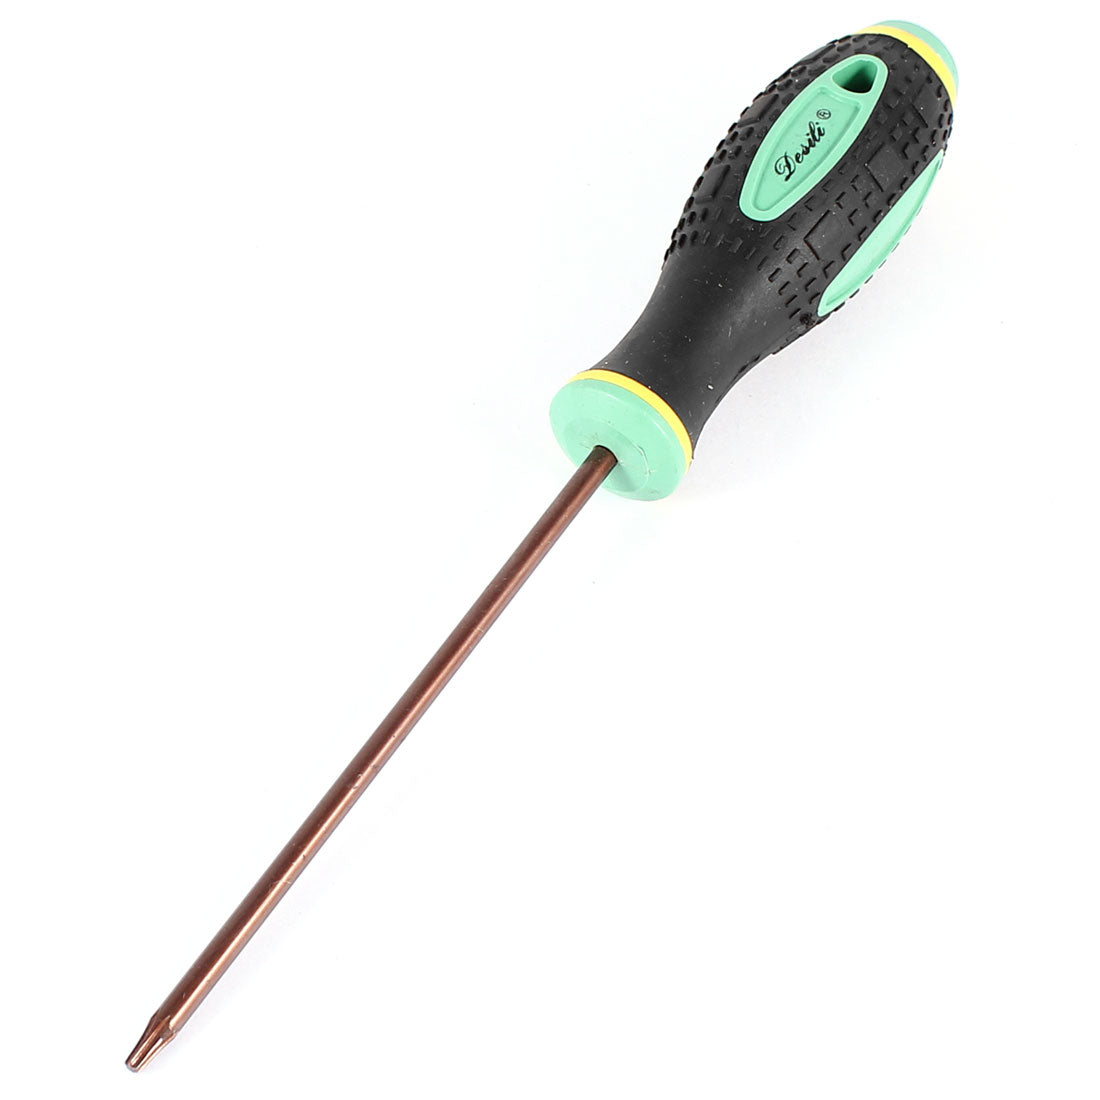 Uxcell Uxcell Repair Tool Nonslip Handle Grip 100mm Long T7 Torx Point Magnetic Tip Screwdriver